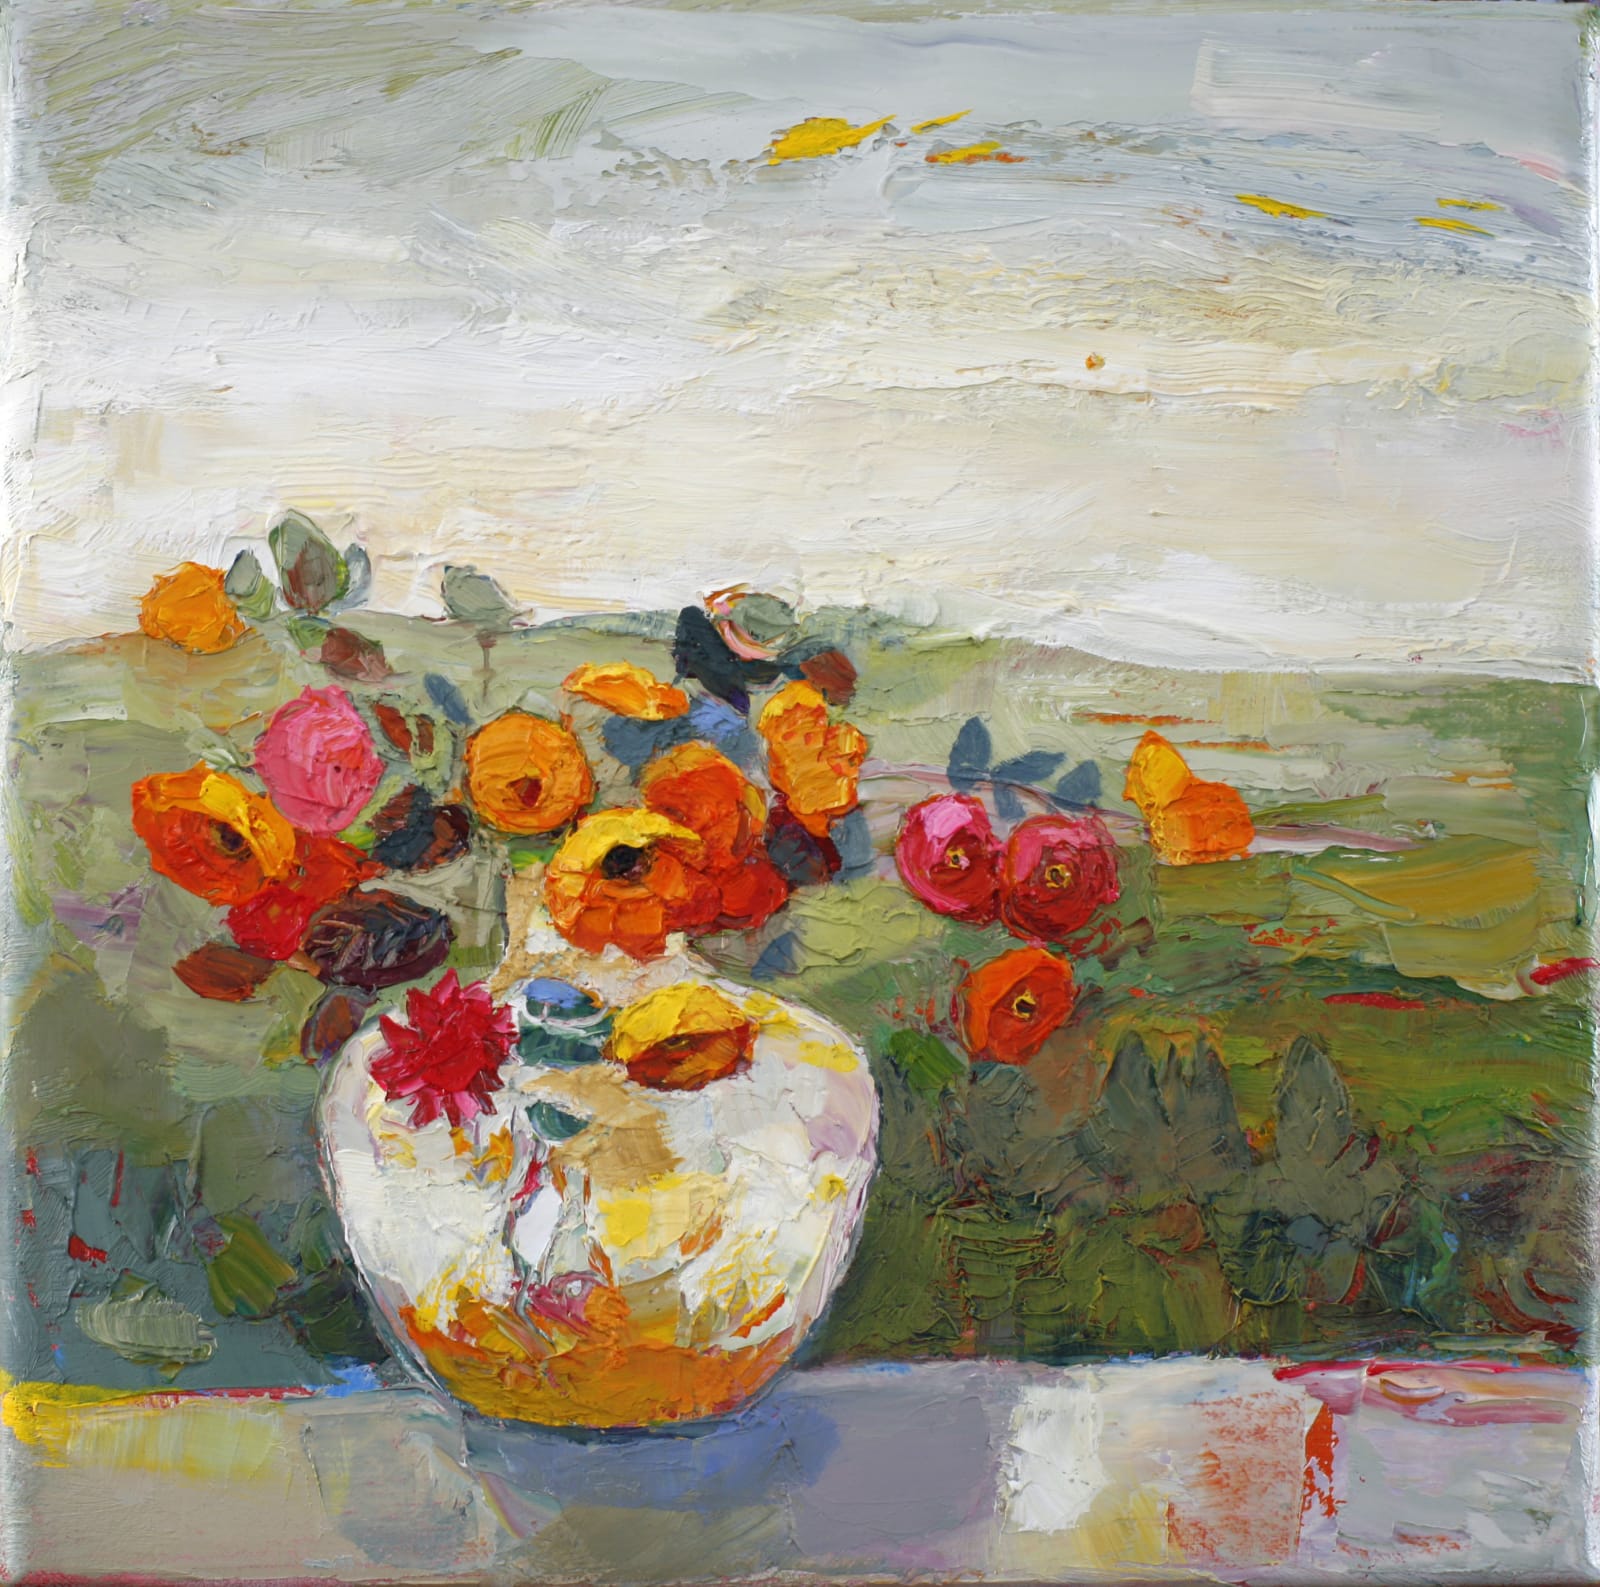 Kirsty Wither, Looking Brighter, 2022